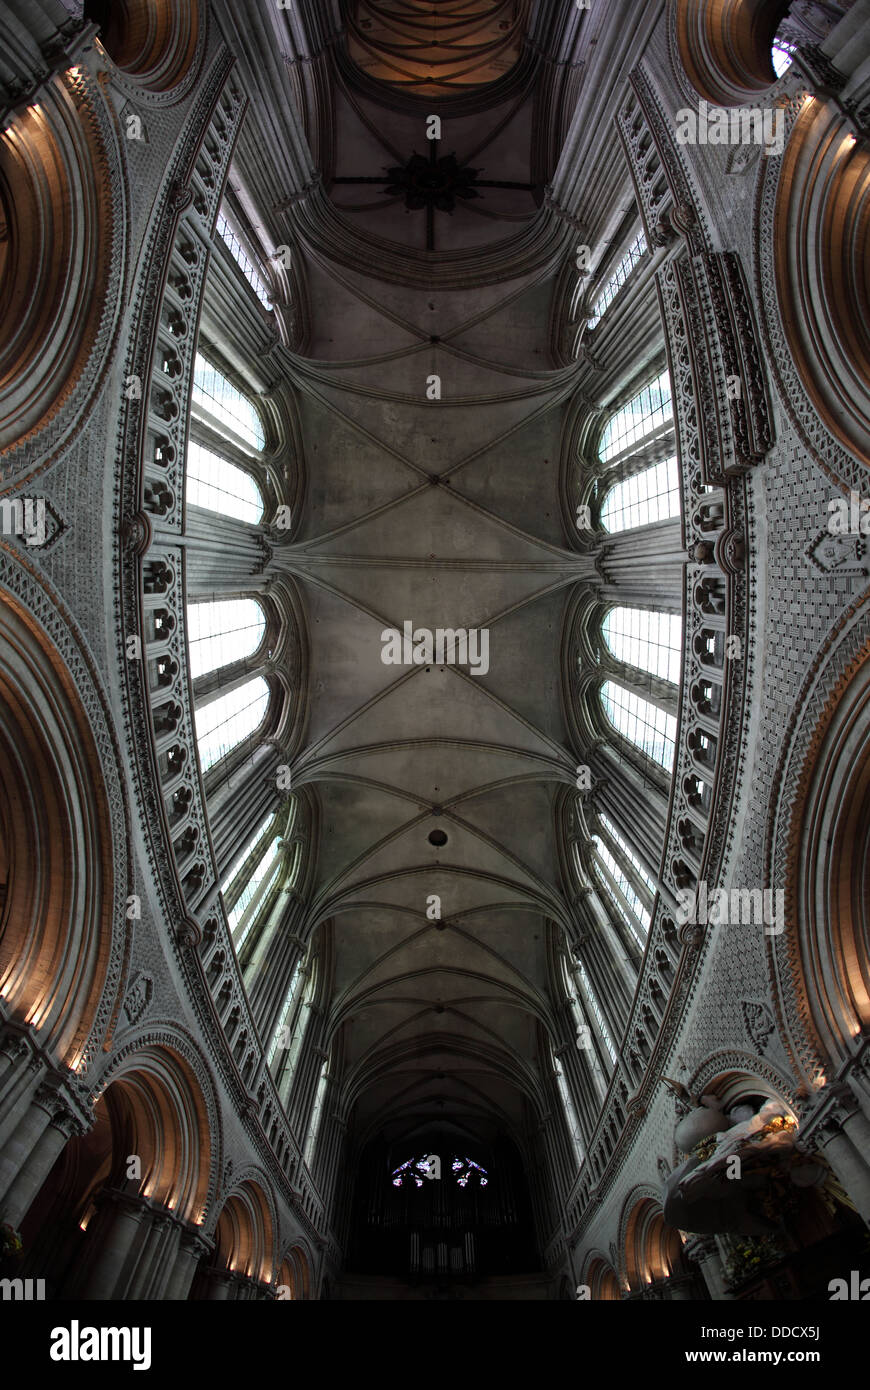 Bayeux cathedral roof interior, celing of the Nave Stock Photo